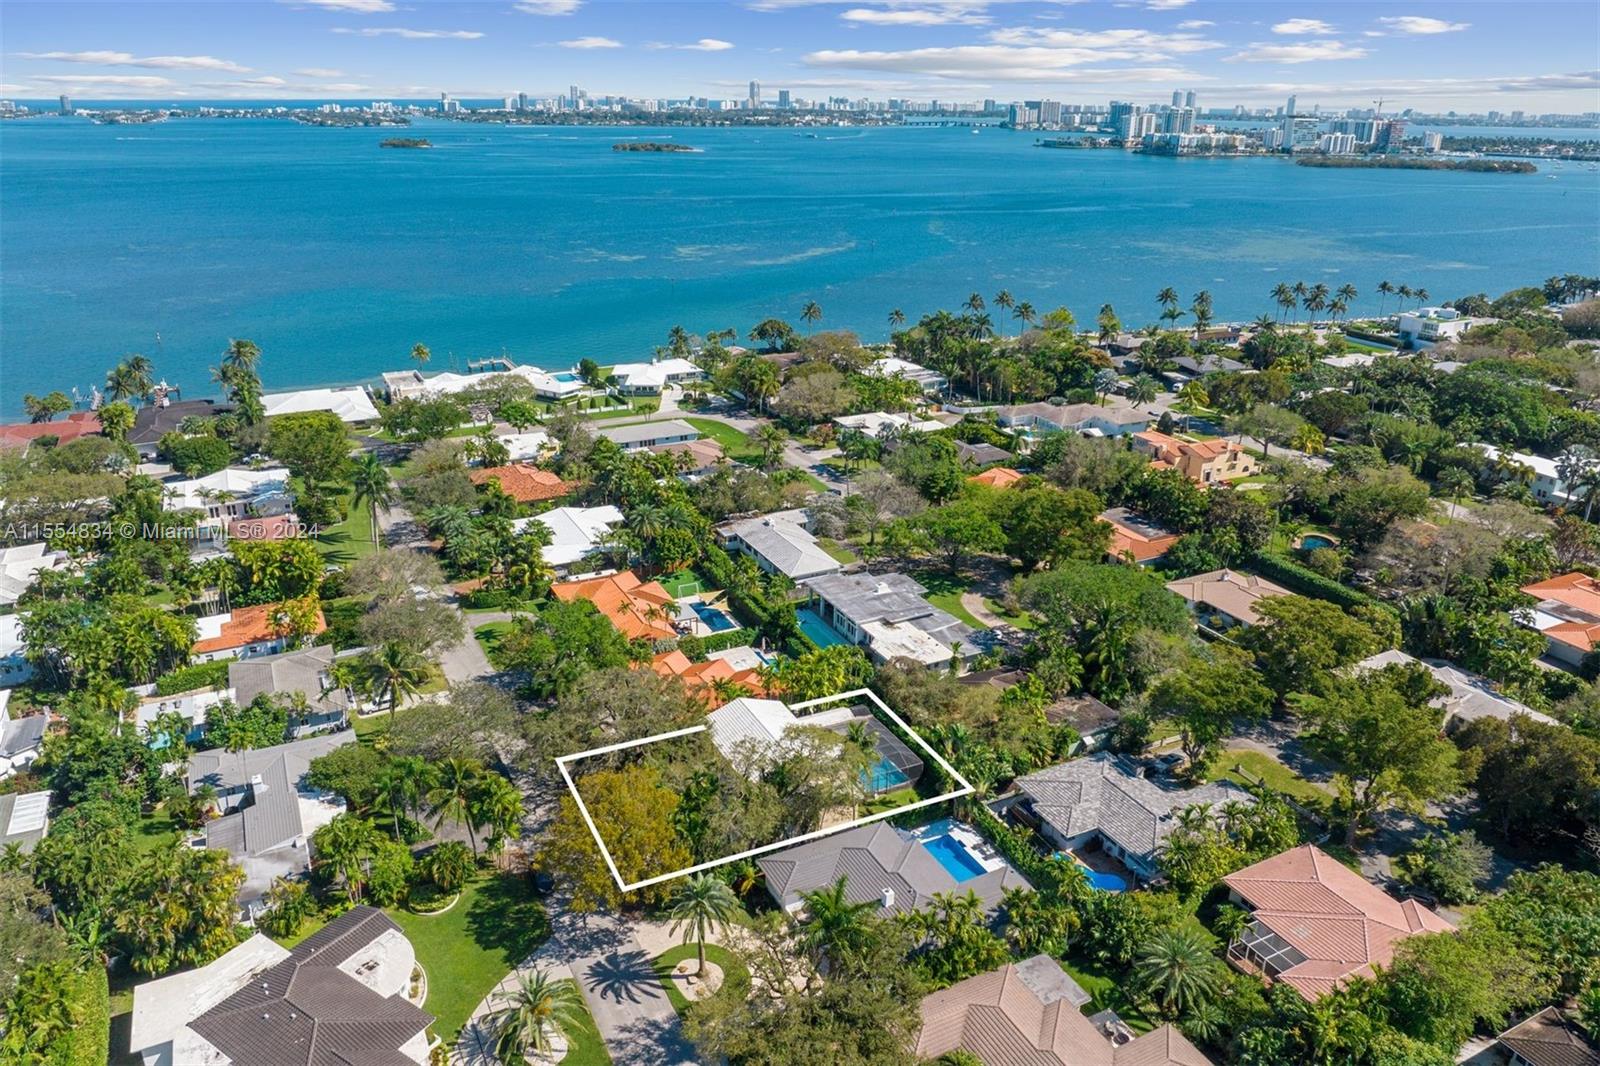 1238 NE 98th St, Miami Shores, Florida 33138, 4 Bedrooms Bedrooms, ,3 BathroomsBathrooms,Residential,For Sale,1238 NE 98th St,A11554834